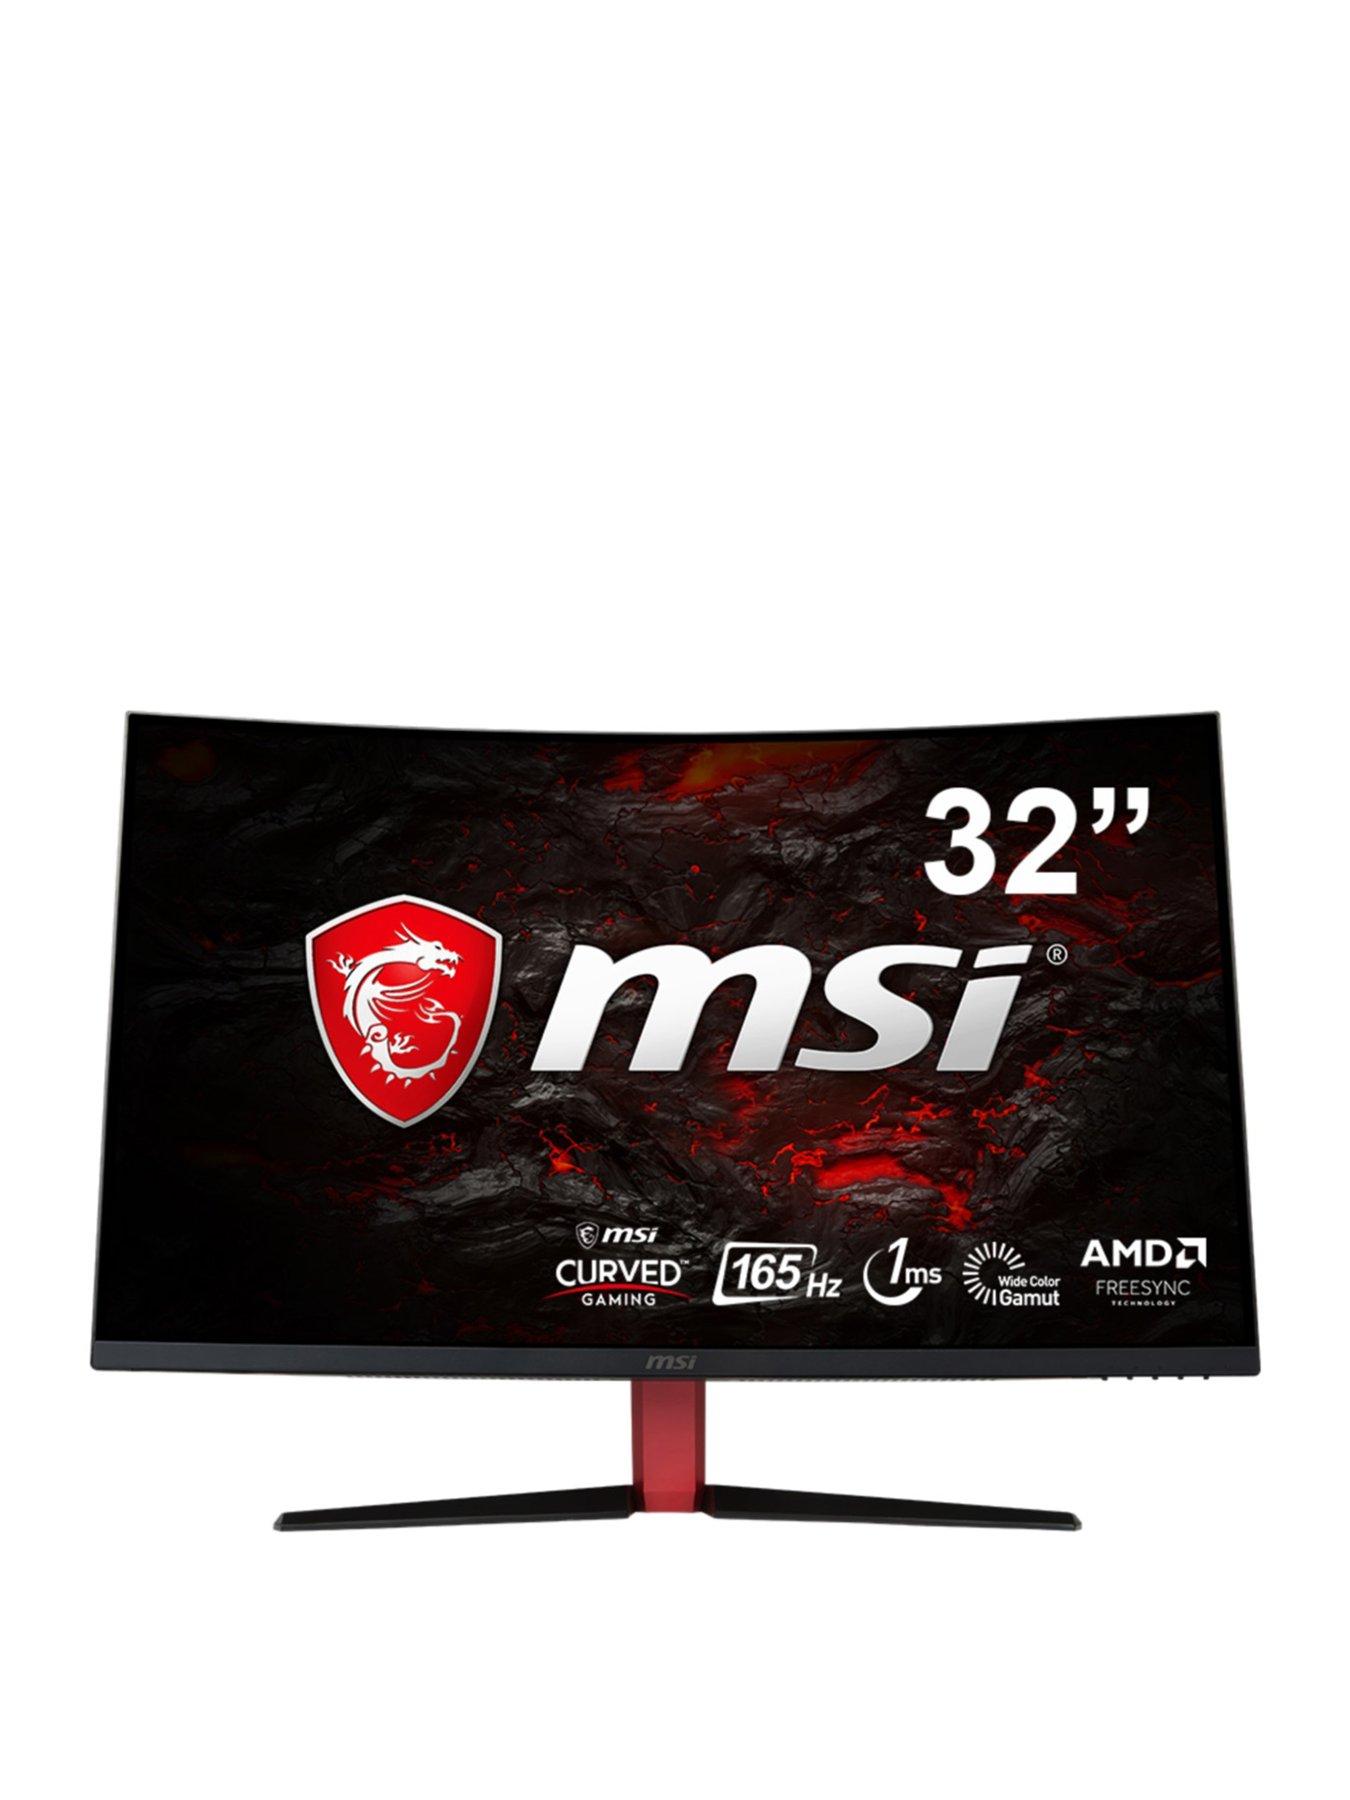 Msi Pc Monitors Computer Accessories Electricals Www Littlewoods Com